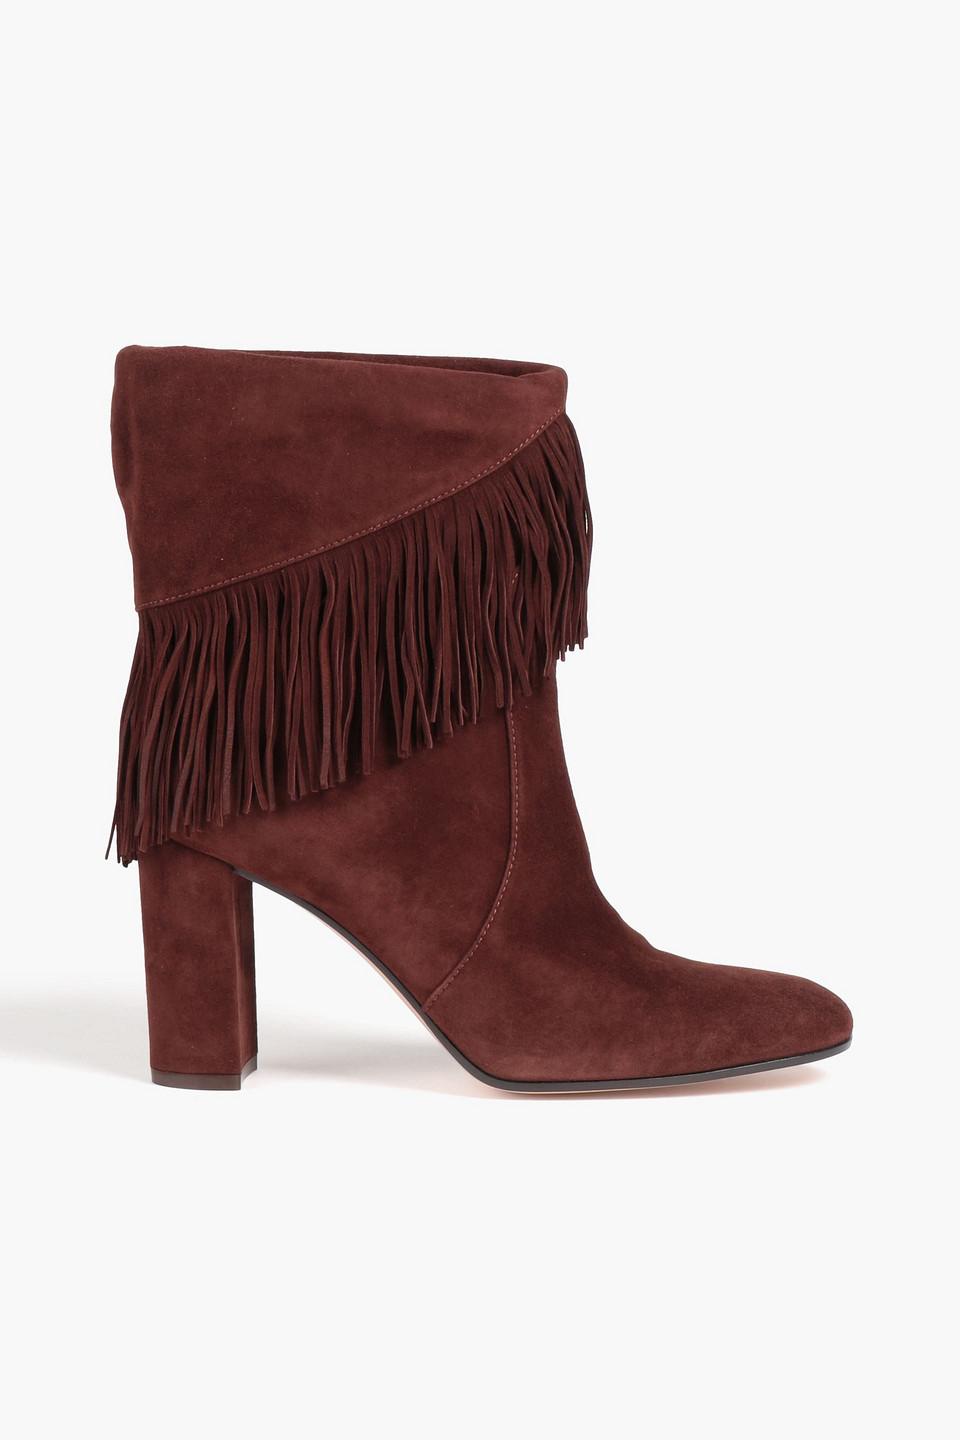 Gianvito Rossi Fringed Suede Ankle Boots in Red | Lyst